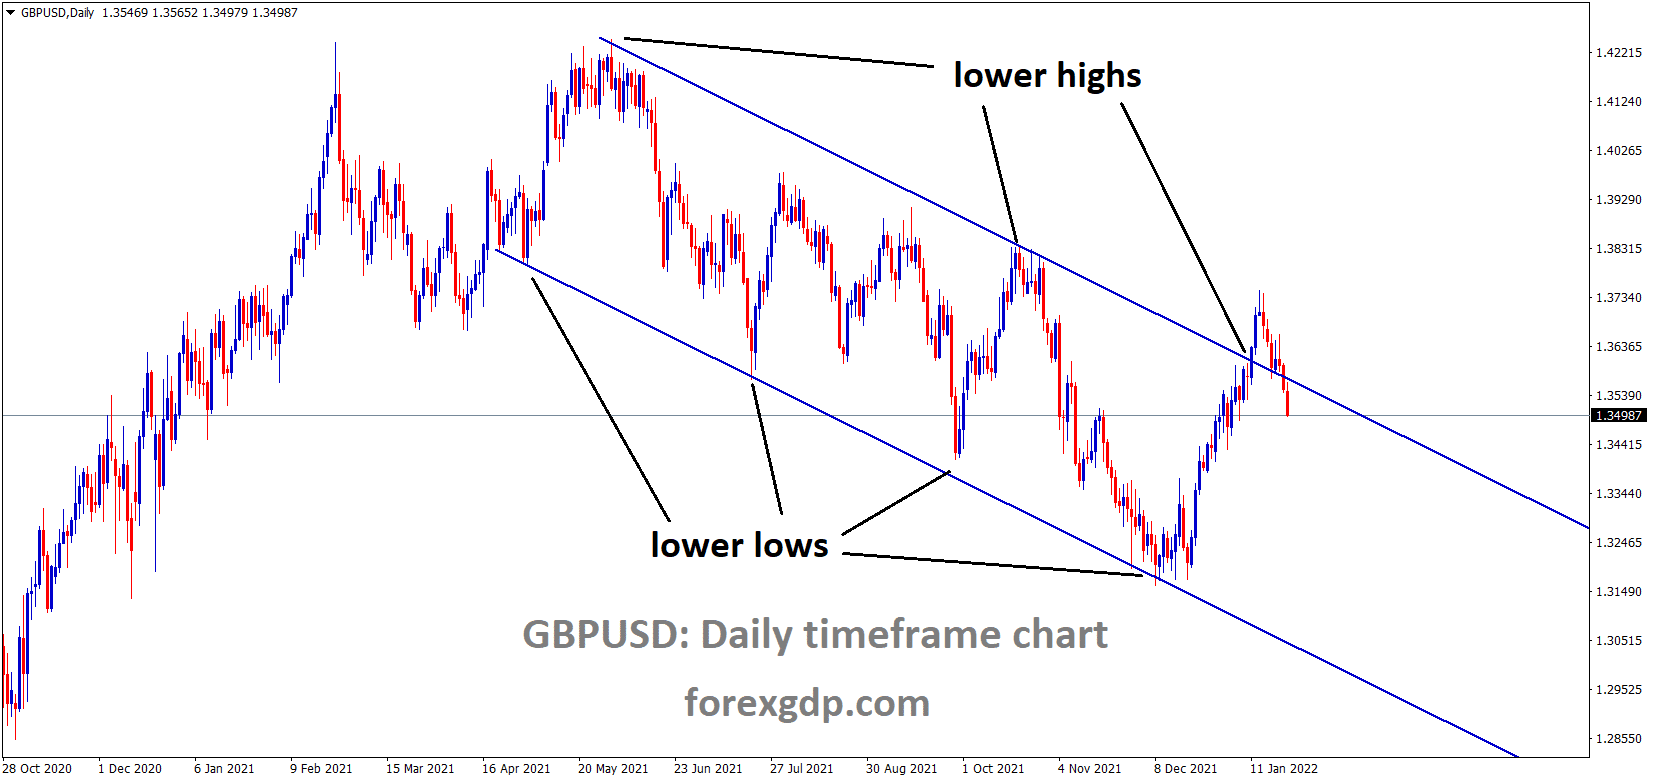 GBPUSD is moving in the Descending channel and the market has fallen from the lower high area of the channel 1 1